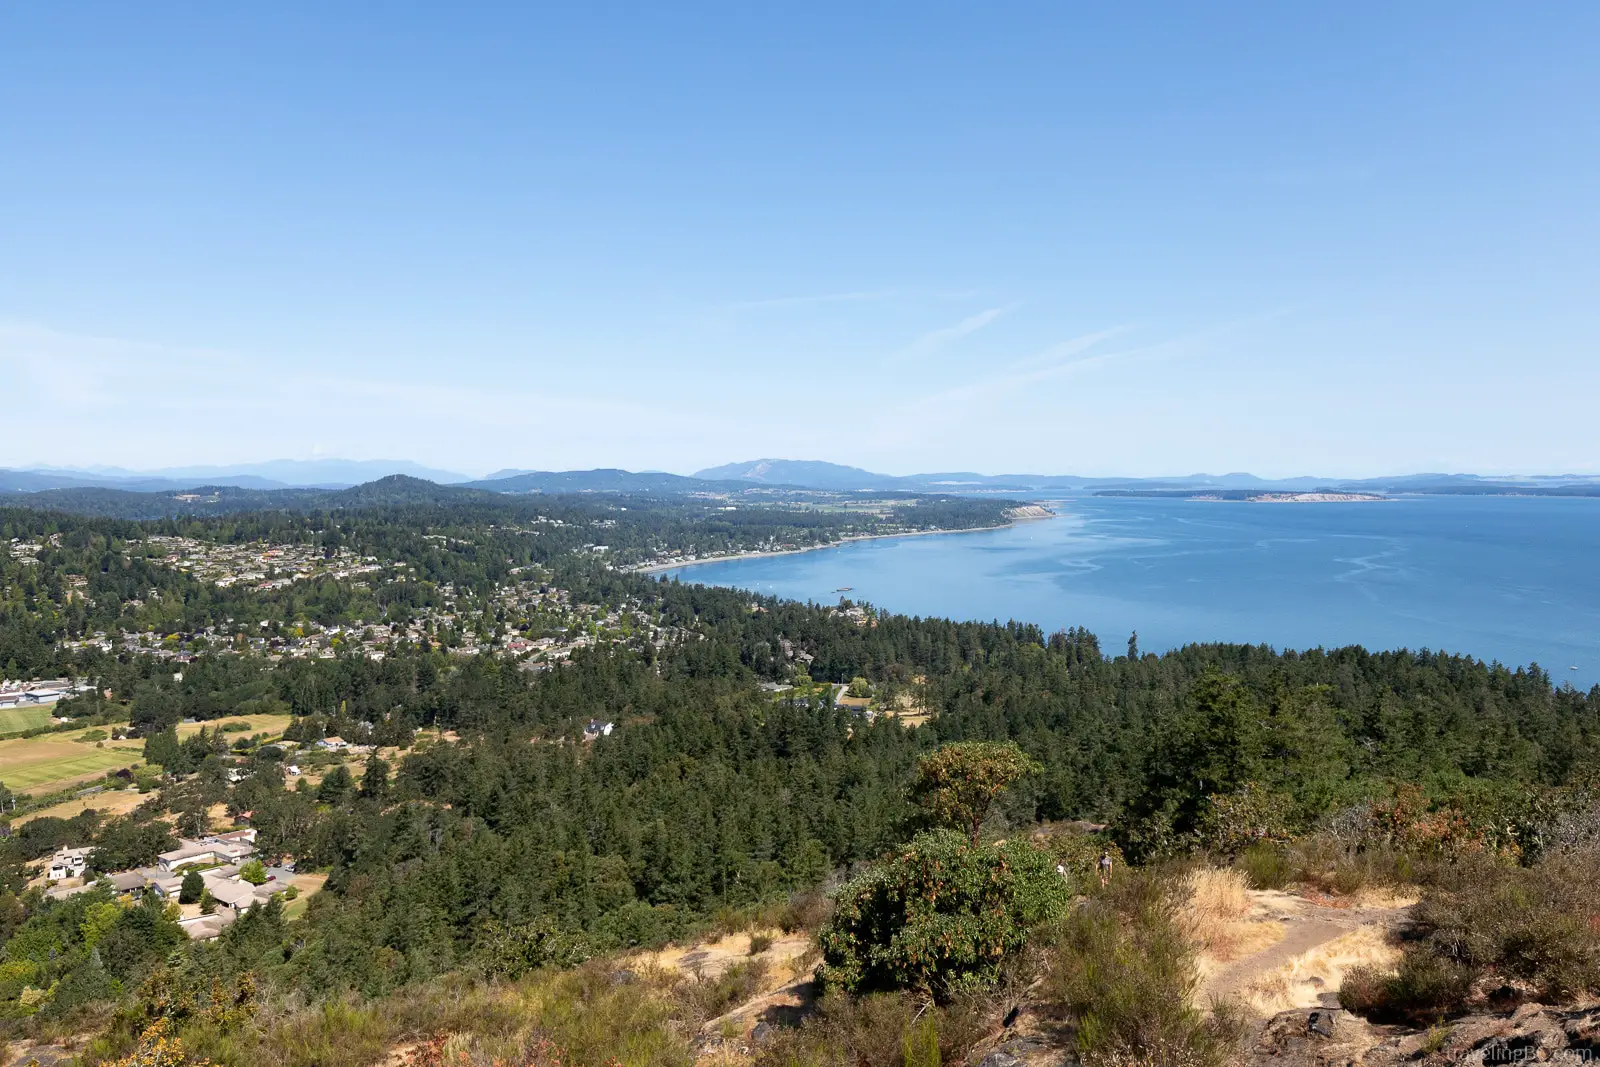 The spectacular view of Cordova Bay from the summit of PKOLS (Mount Douglas)